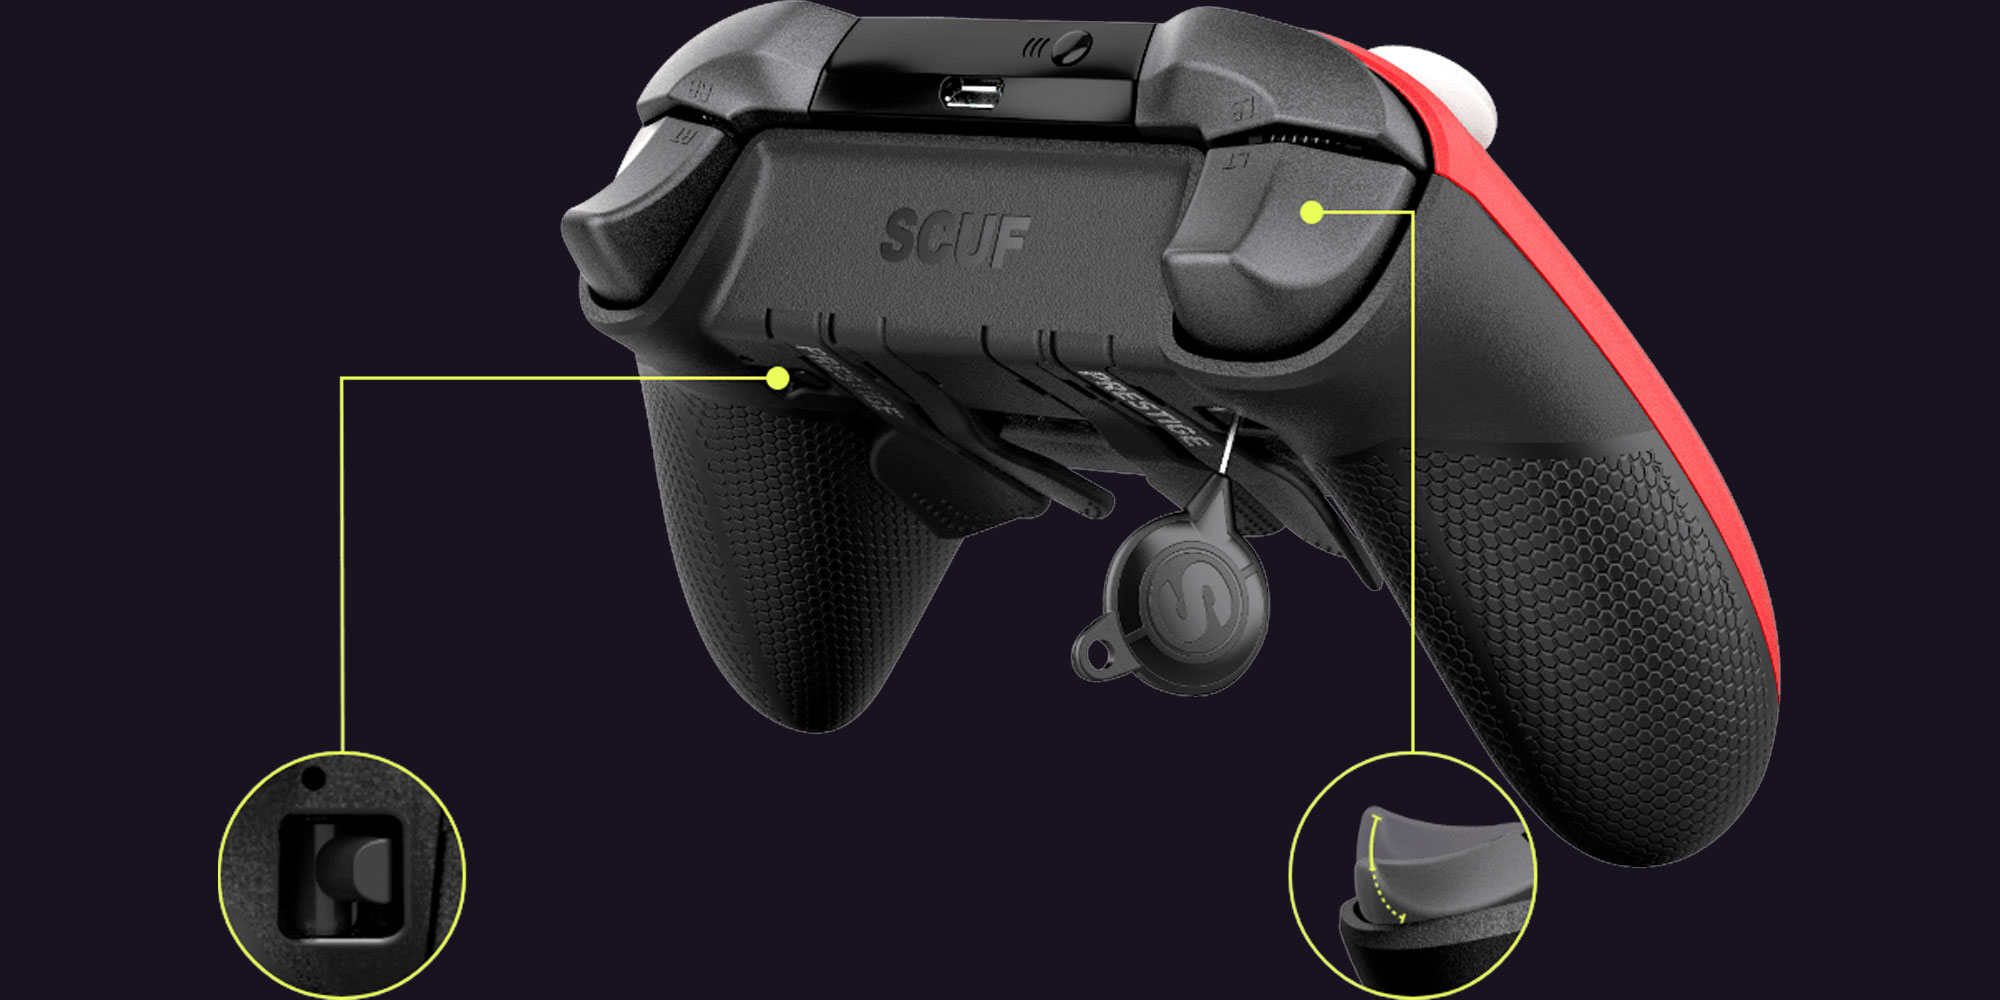 SCUF Gaming Launches a New Xbox One Controller